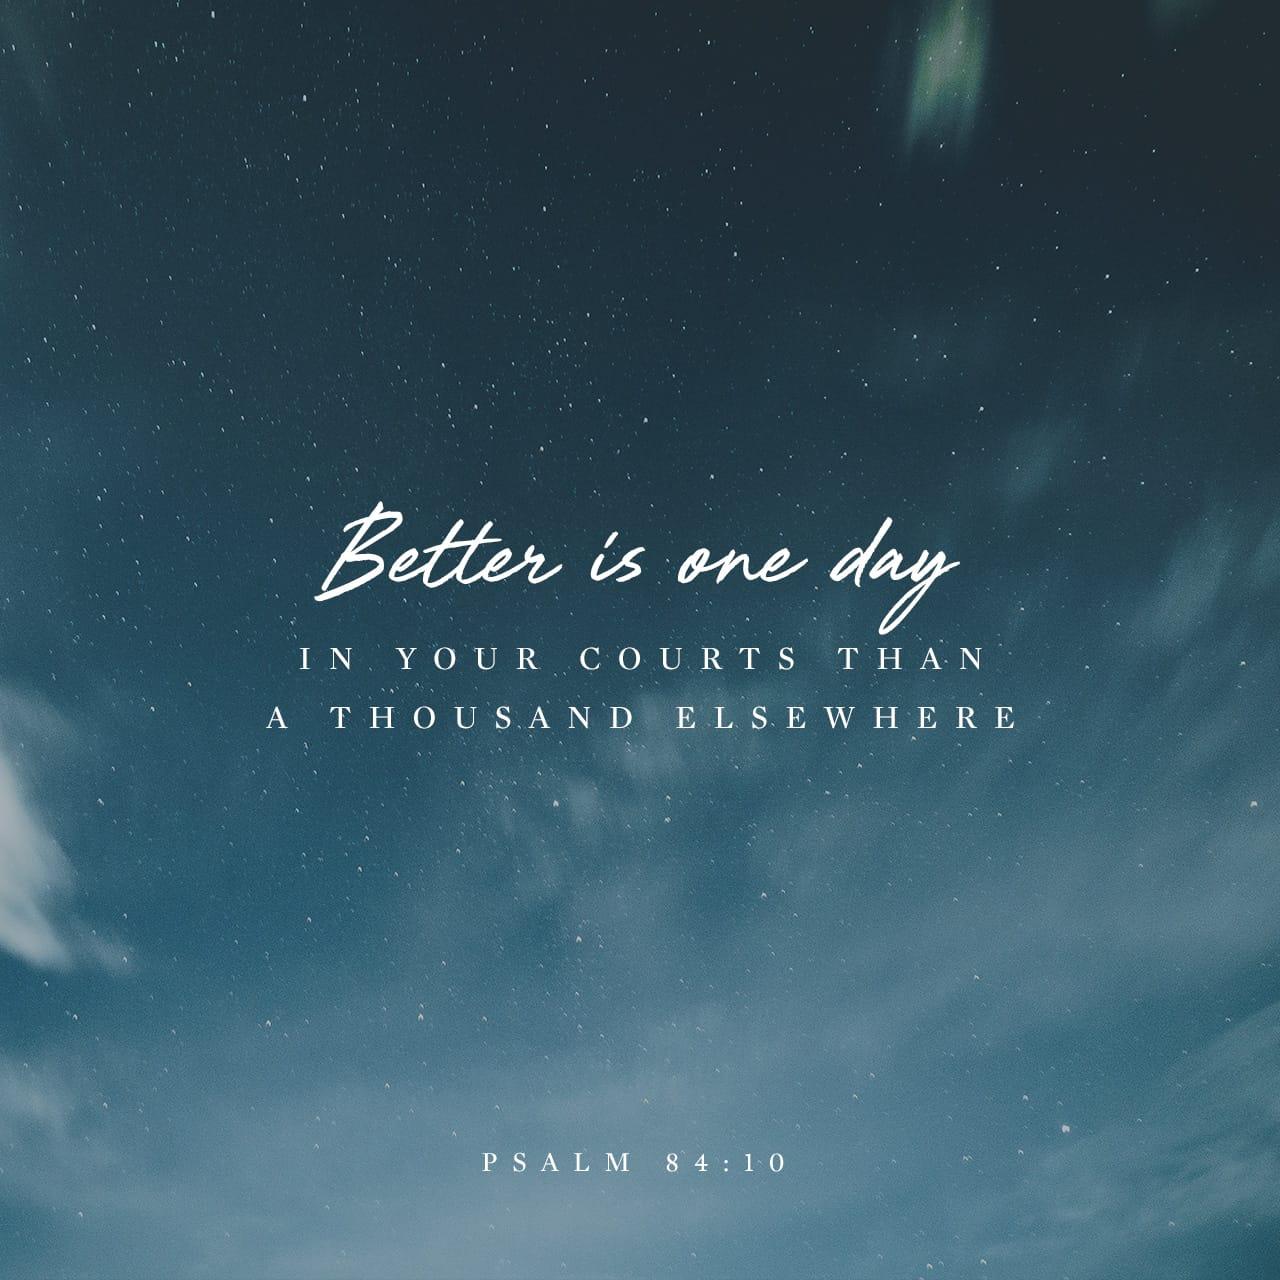 Bible Verse of the Day - day 148 - image 2603 (Psalms 84:1-12)